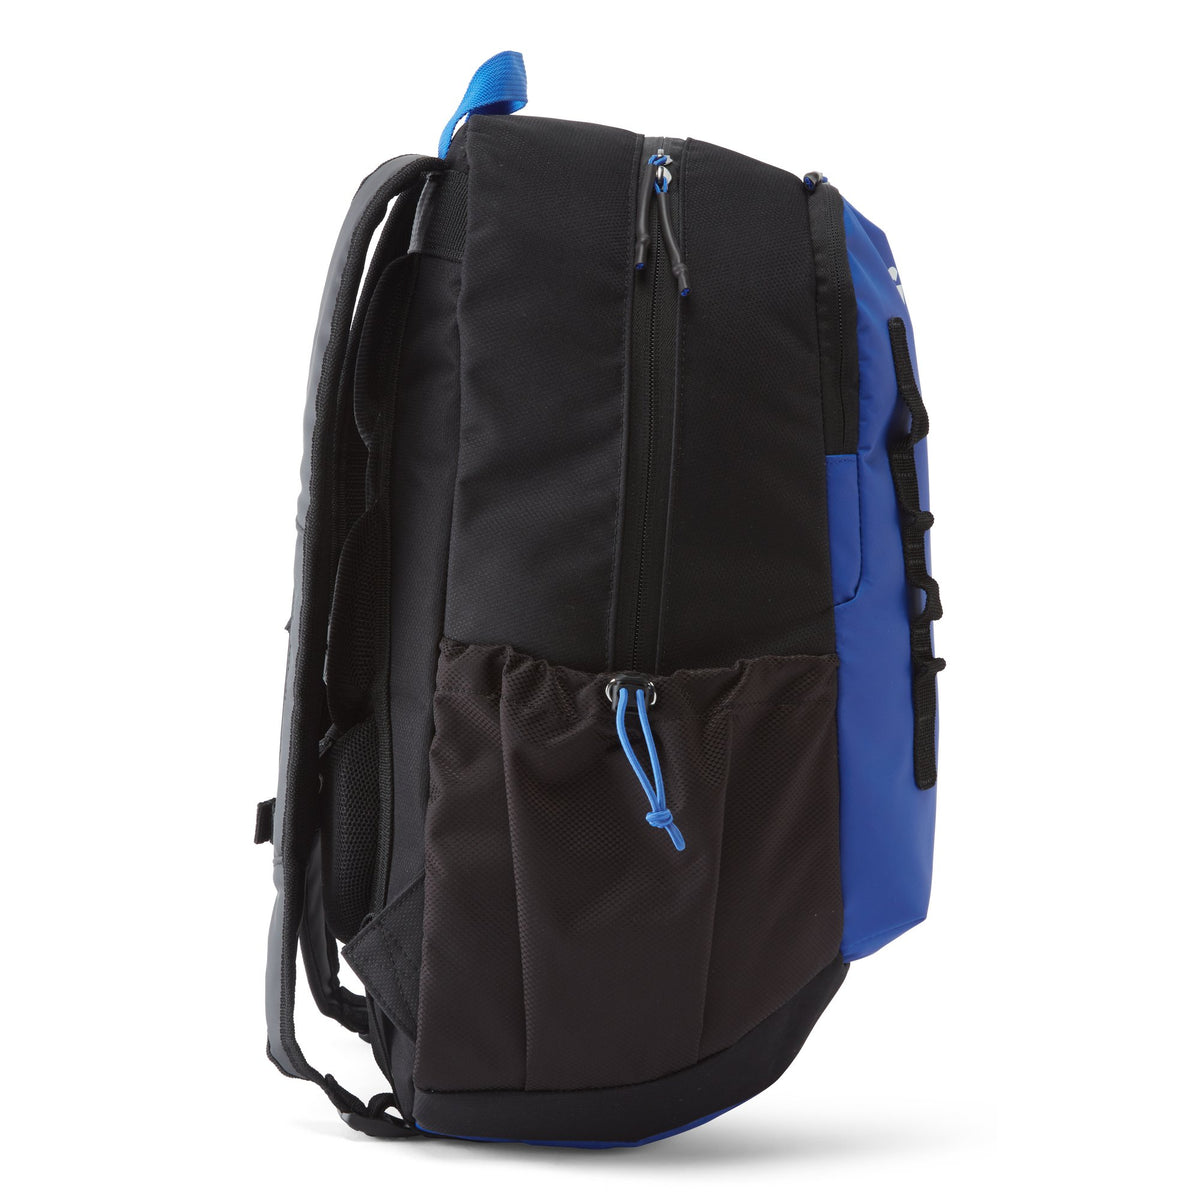 GILL Transit Backpack